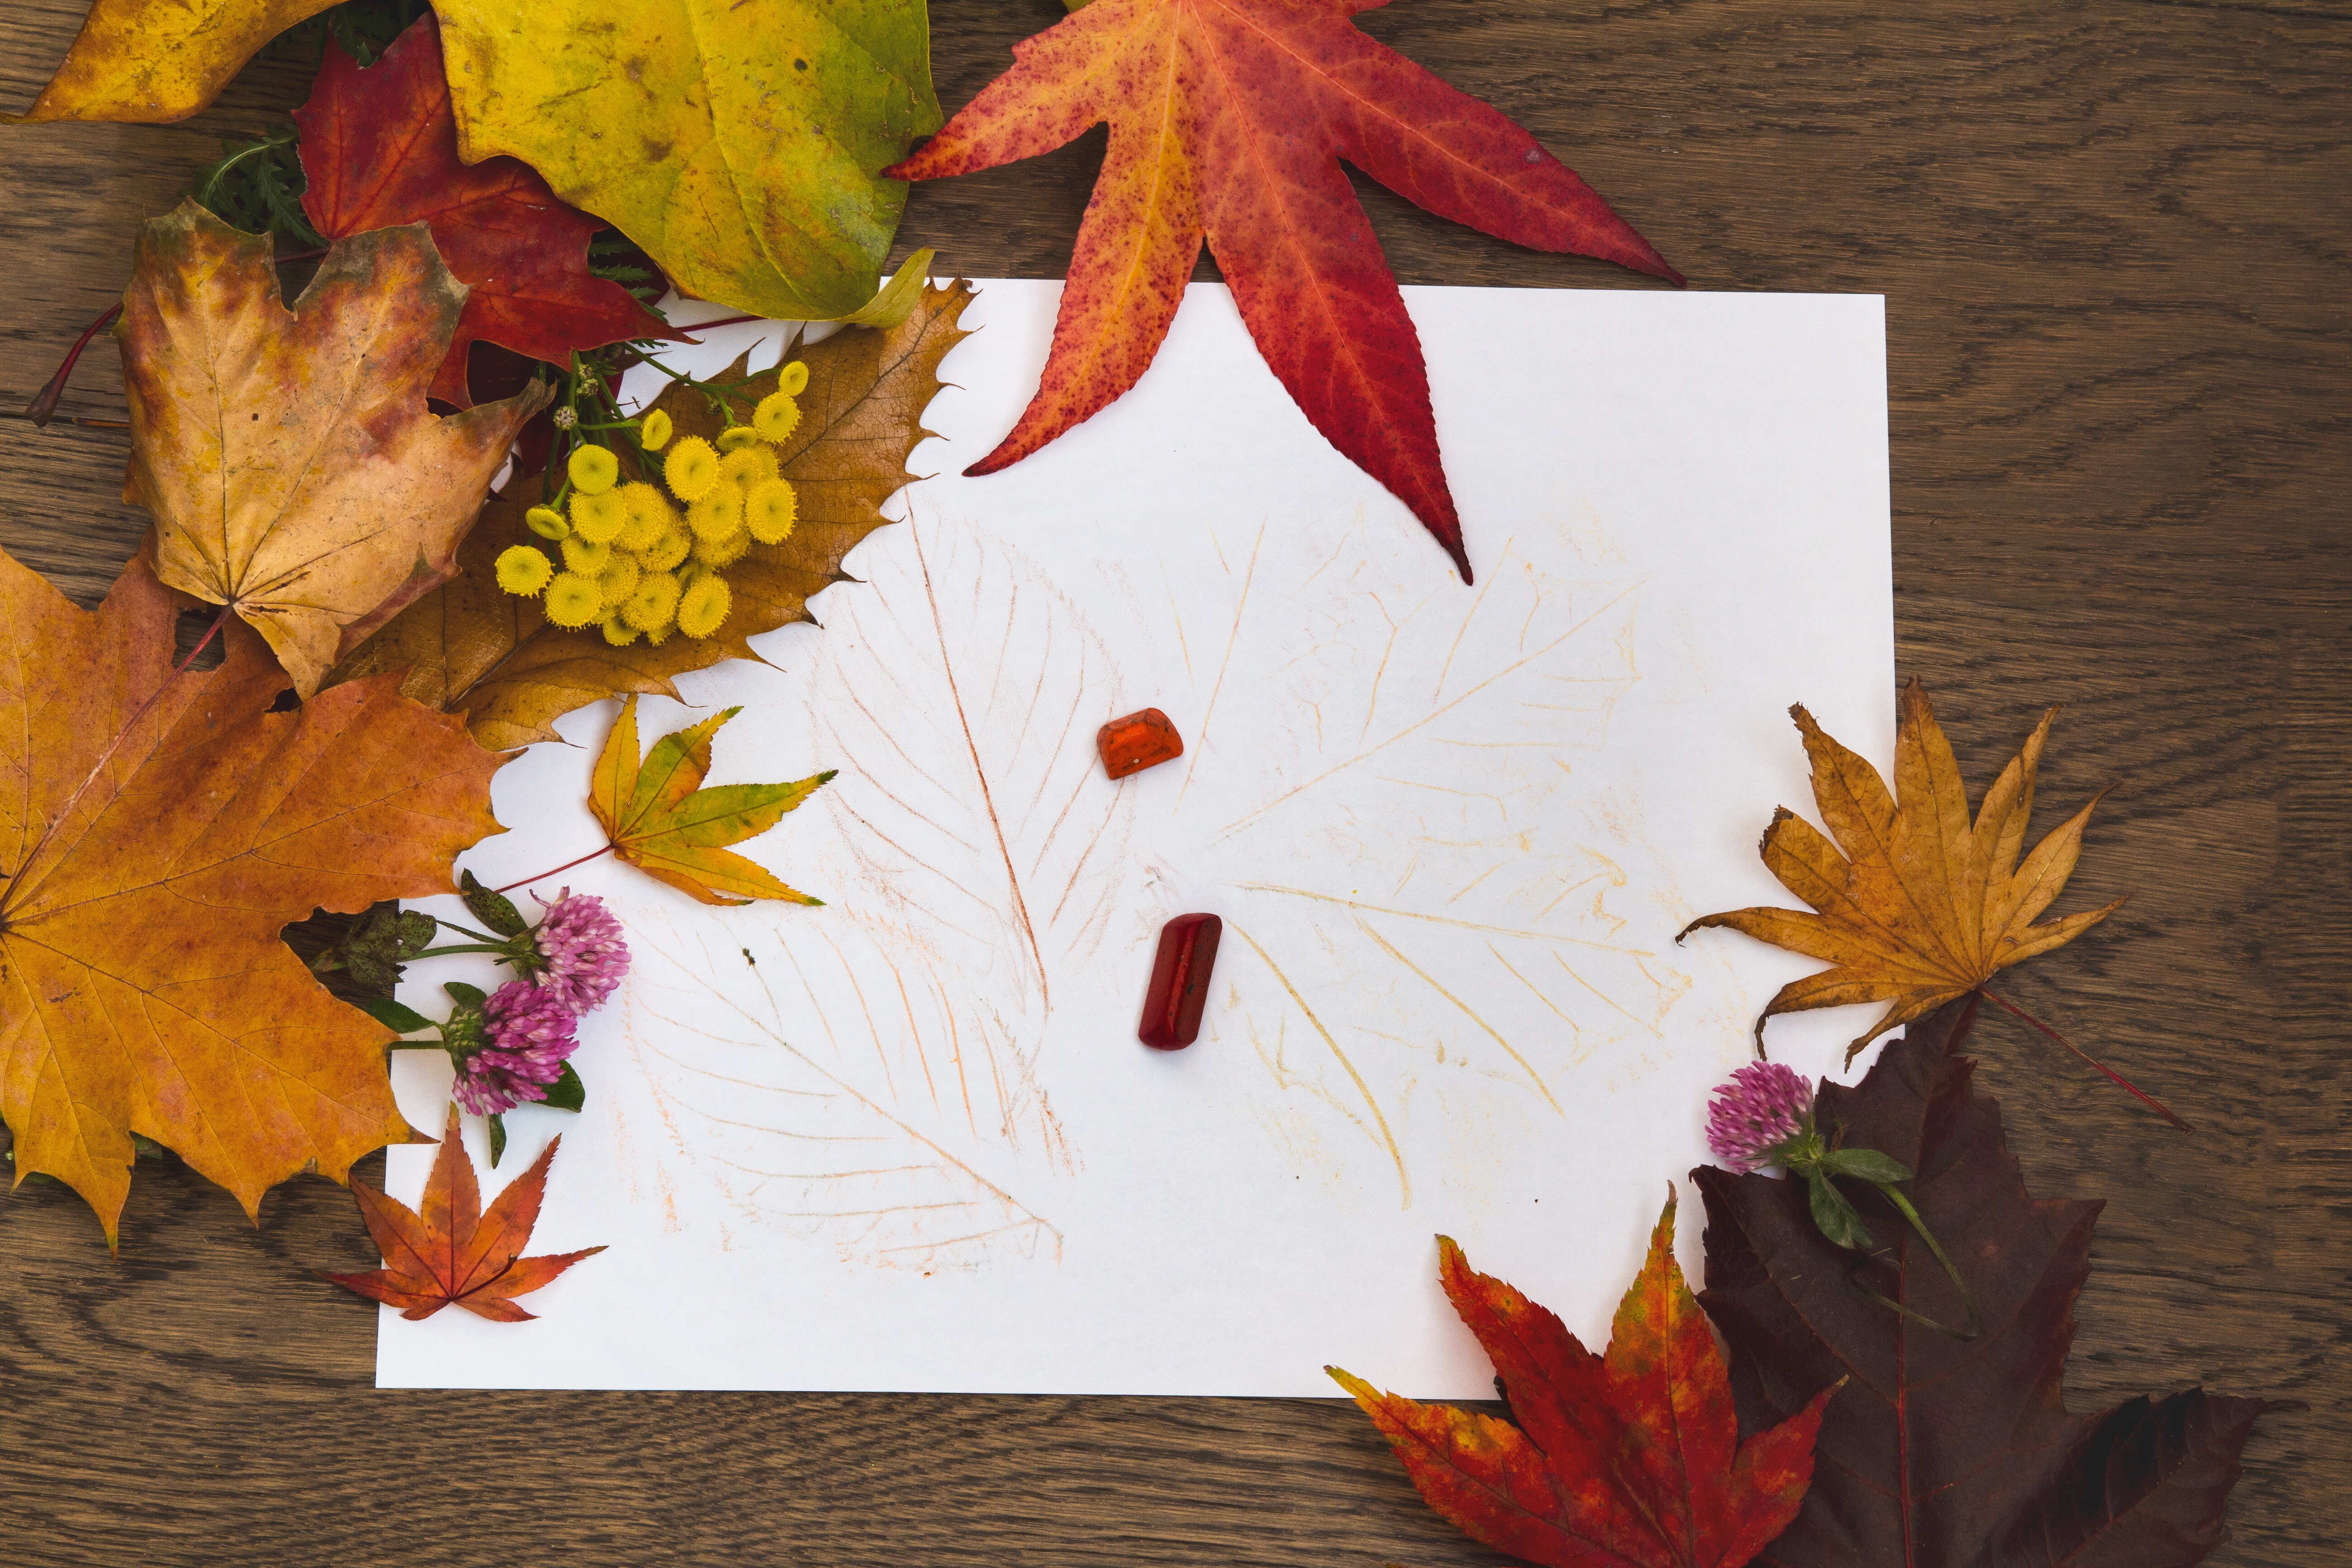 Childrens leaf rubbing with crayons and decorated with fall leaves; Autumn leaves and tansy surround kids leaf rubbing